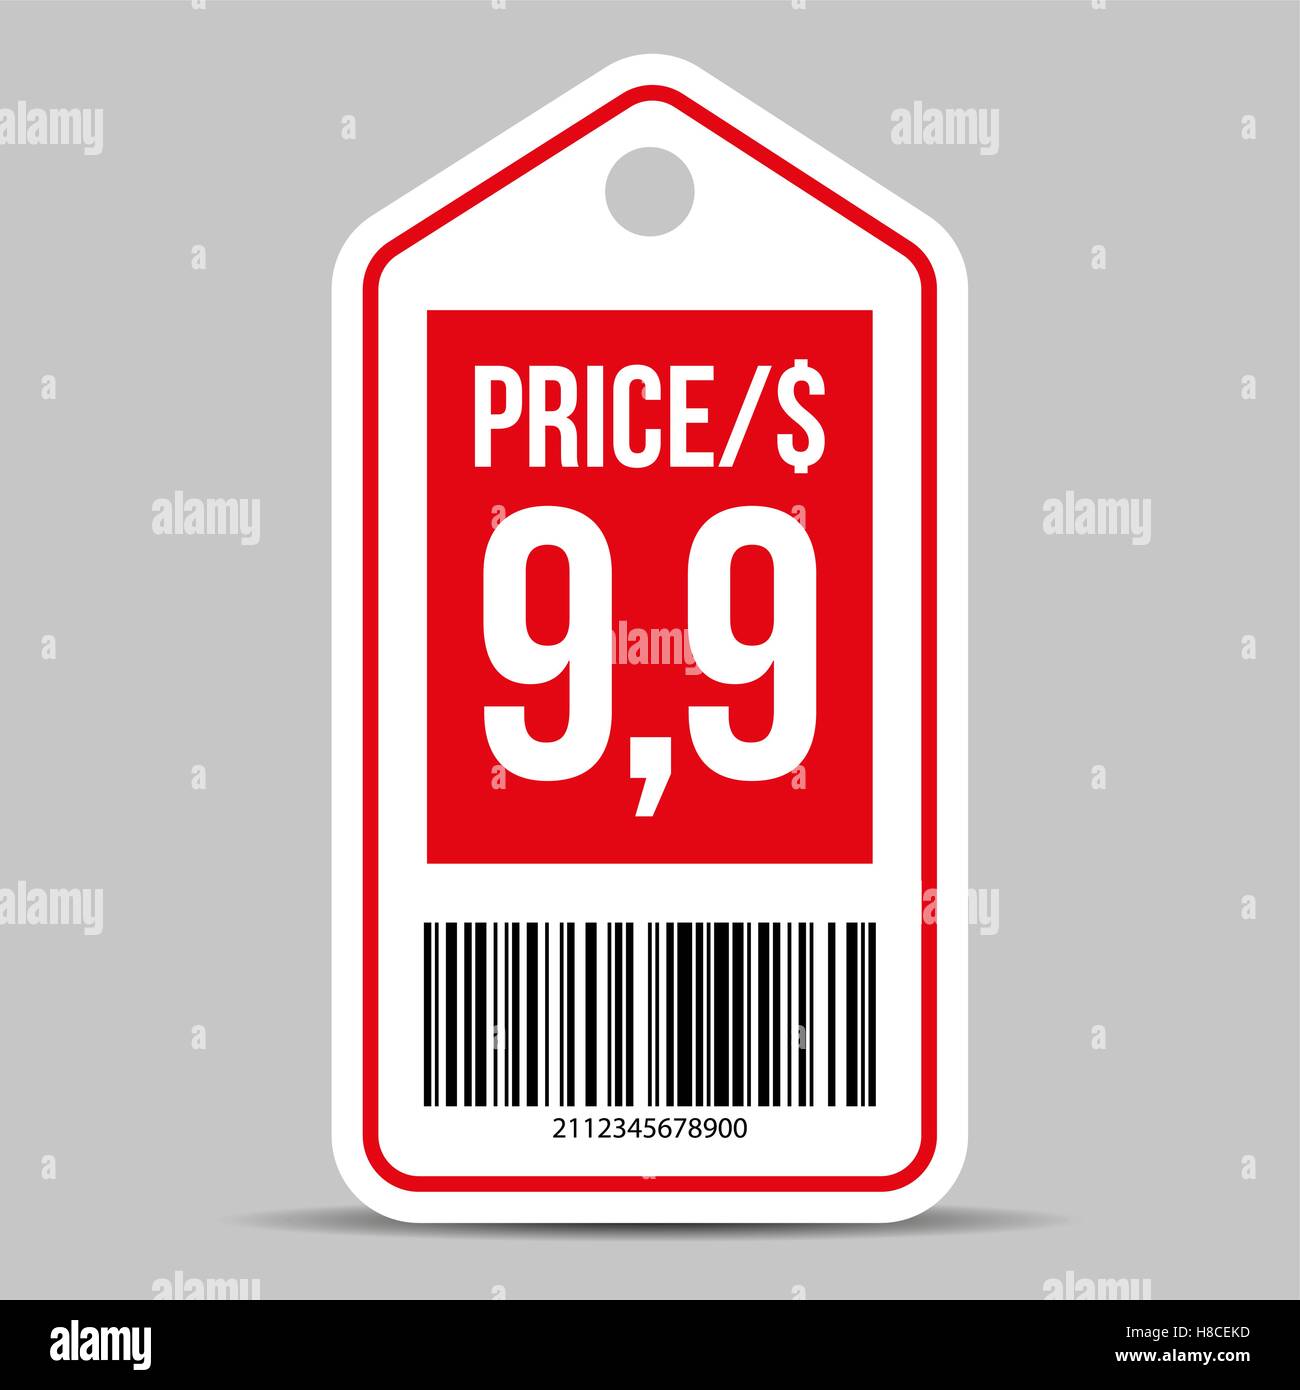 Price tag vector red Stock Vector